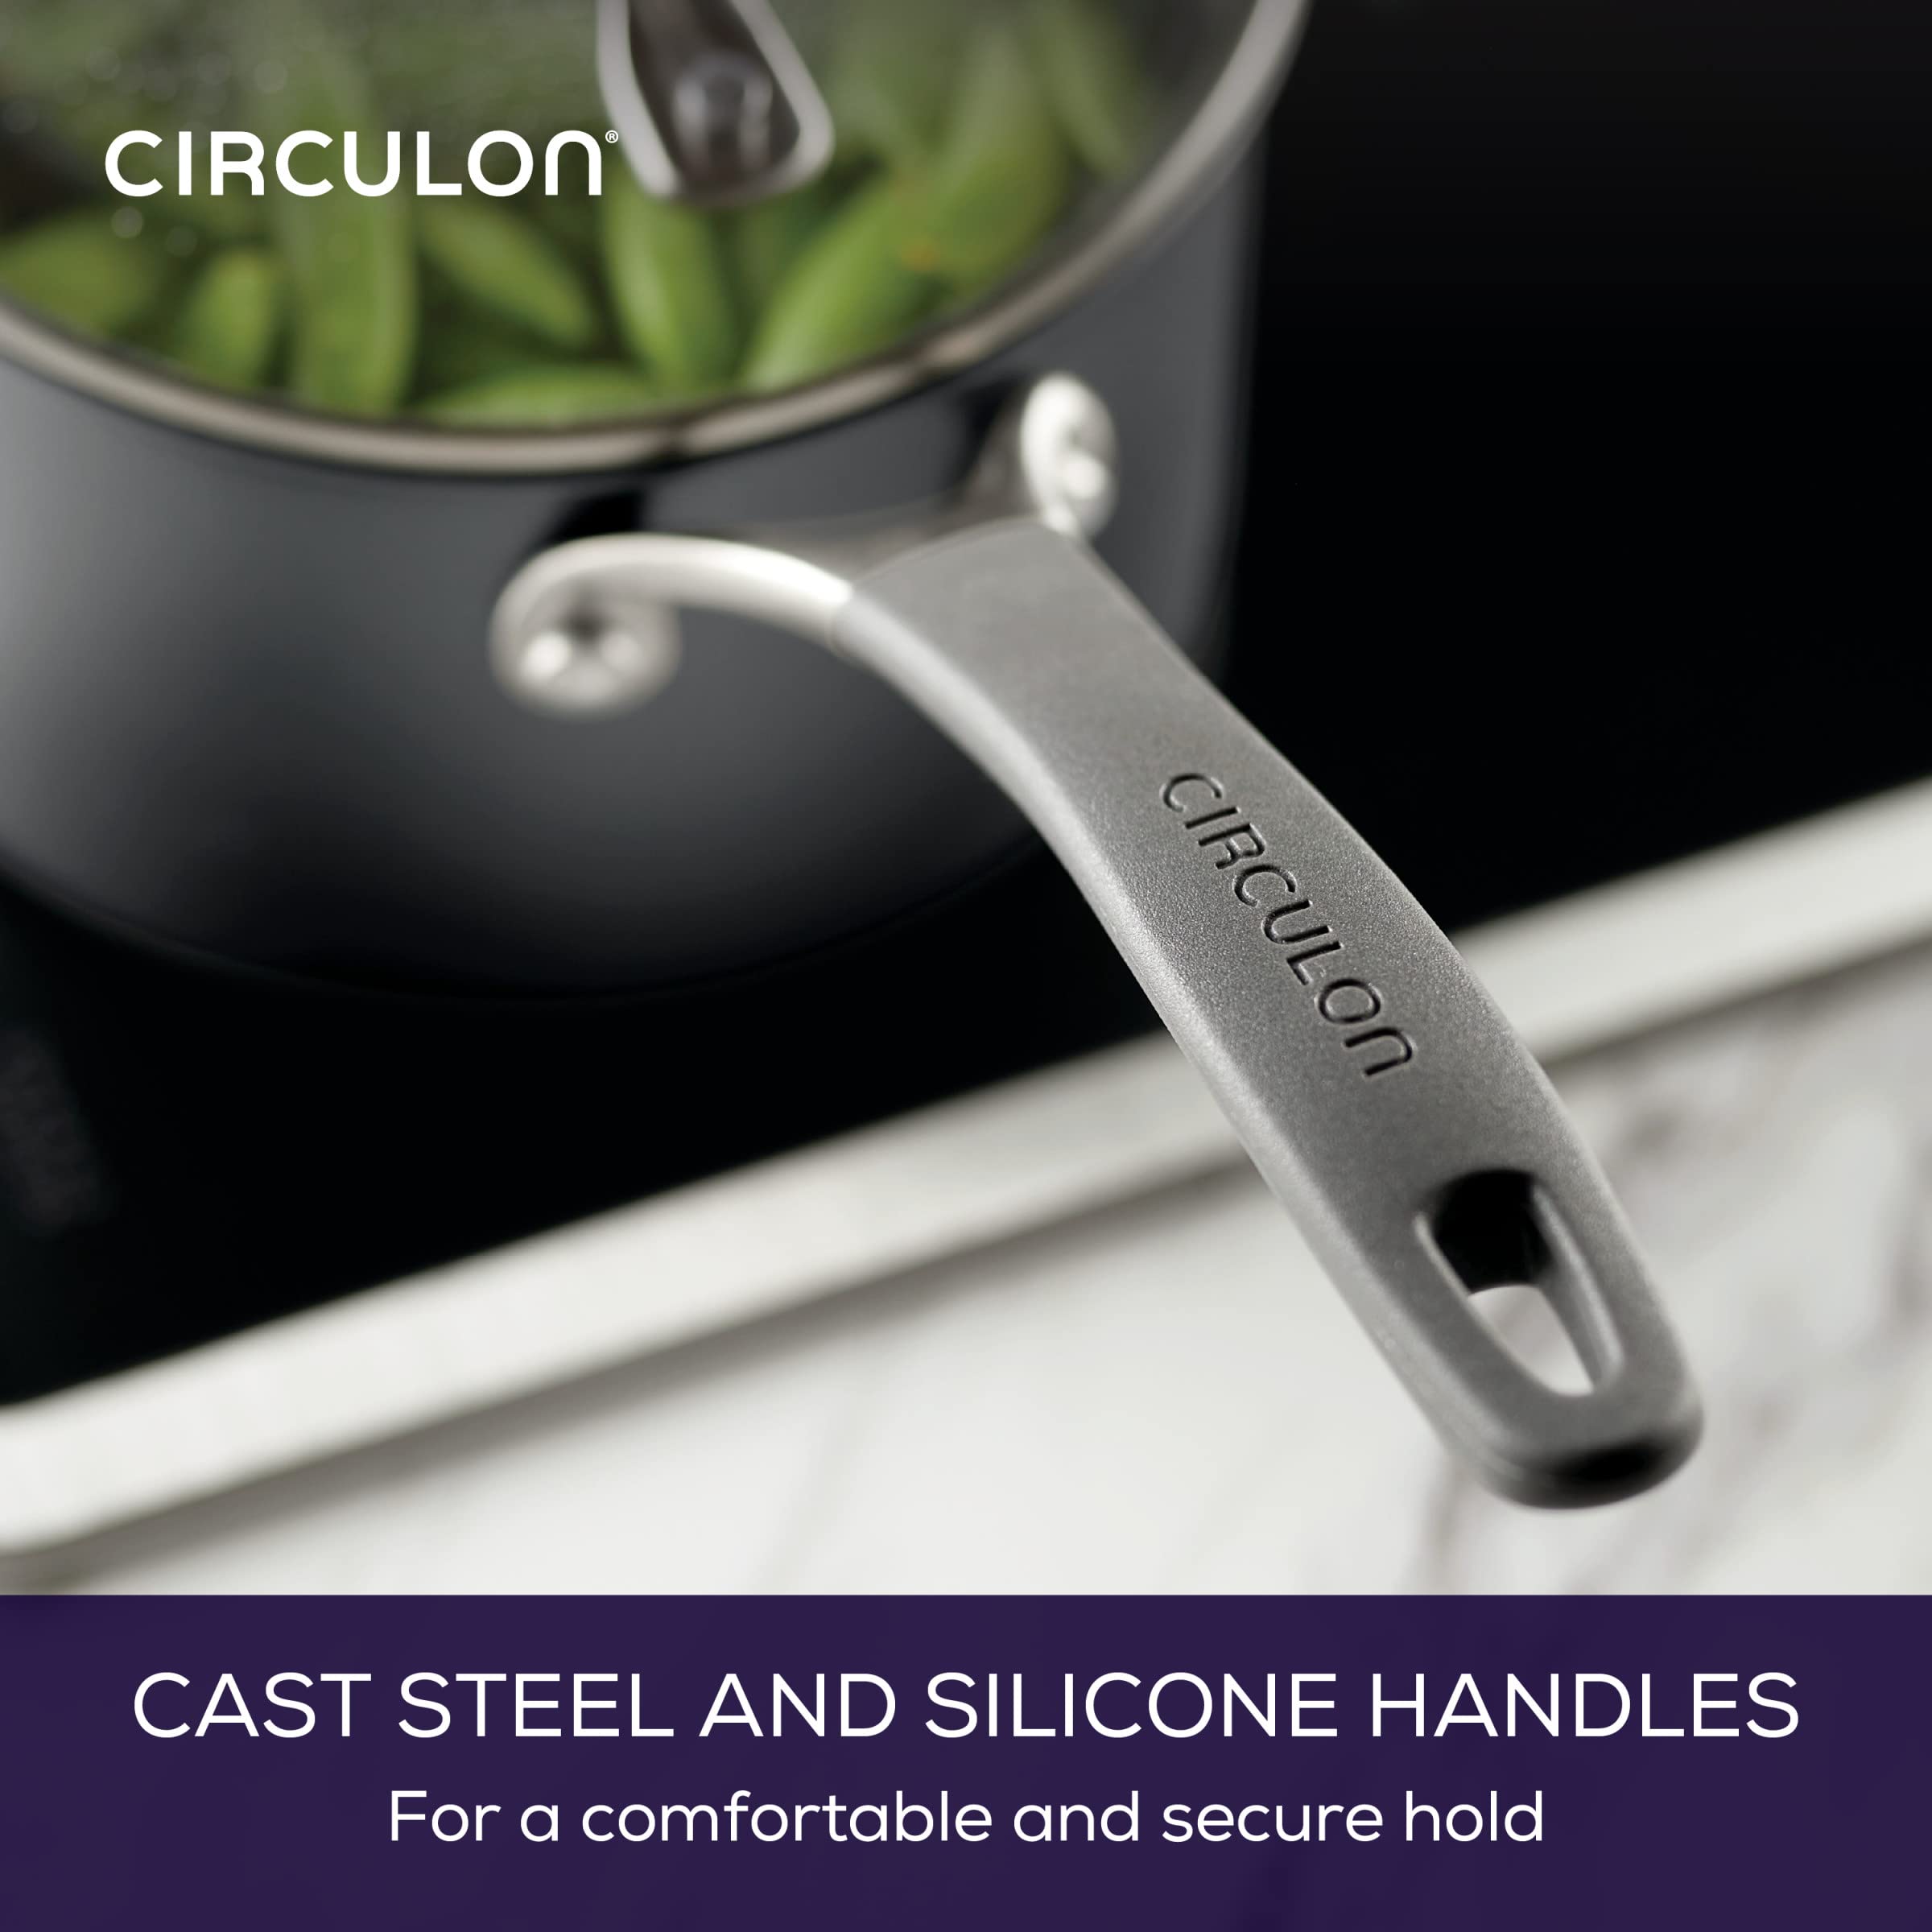 Circulon A1 Series with ScratchDefense Technology Nonstick Induction Straining Sauce Pan with Lid, 2 Quart, Graphite